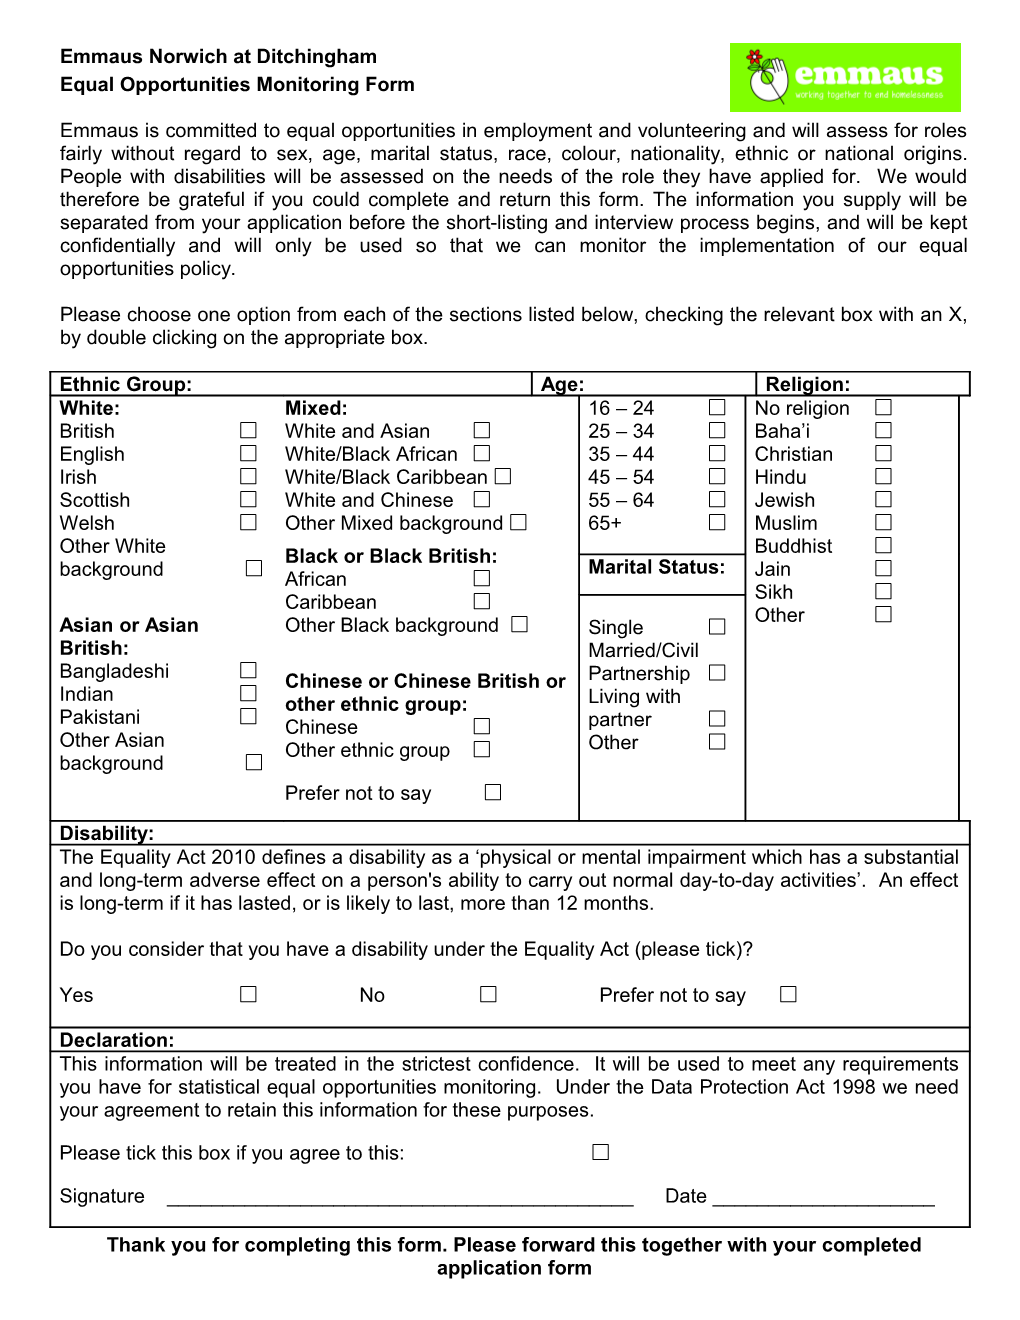 Equal Opportunities Monitoring Form s12